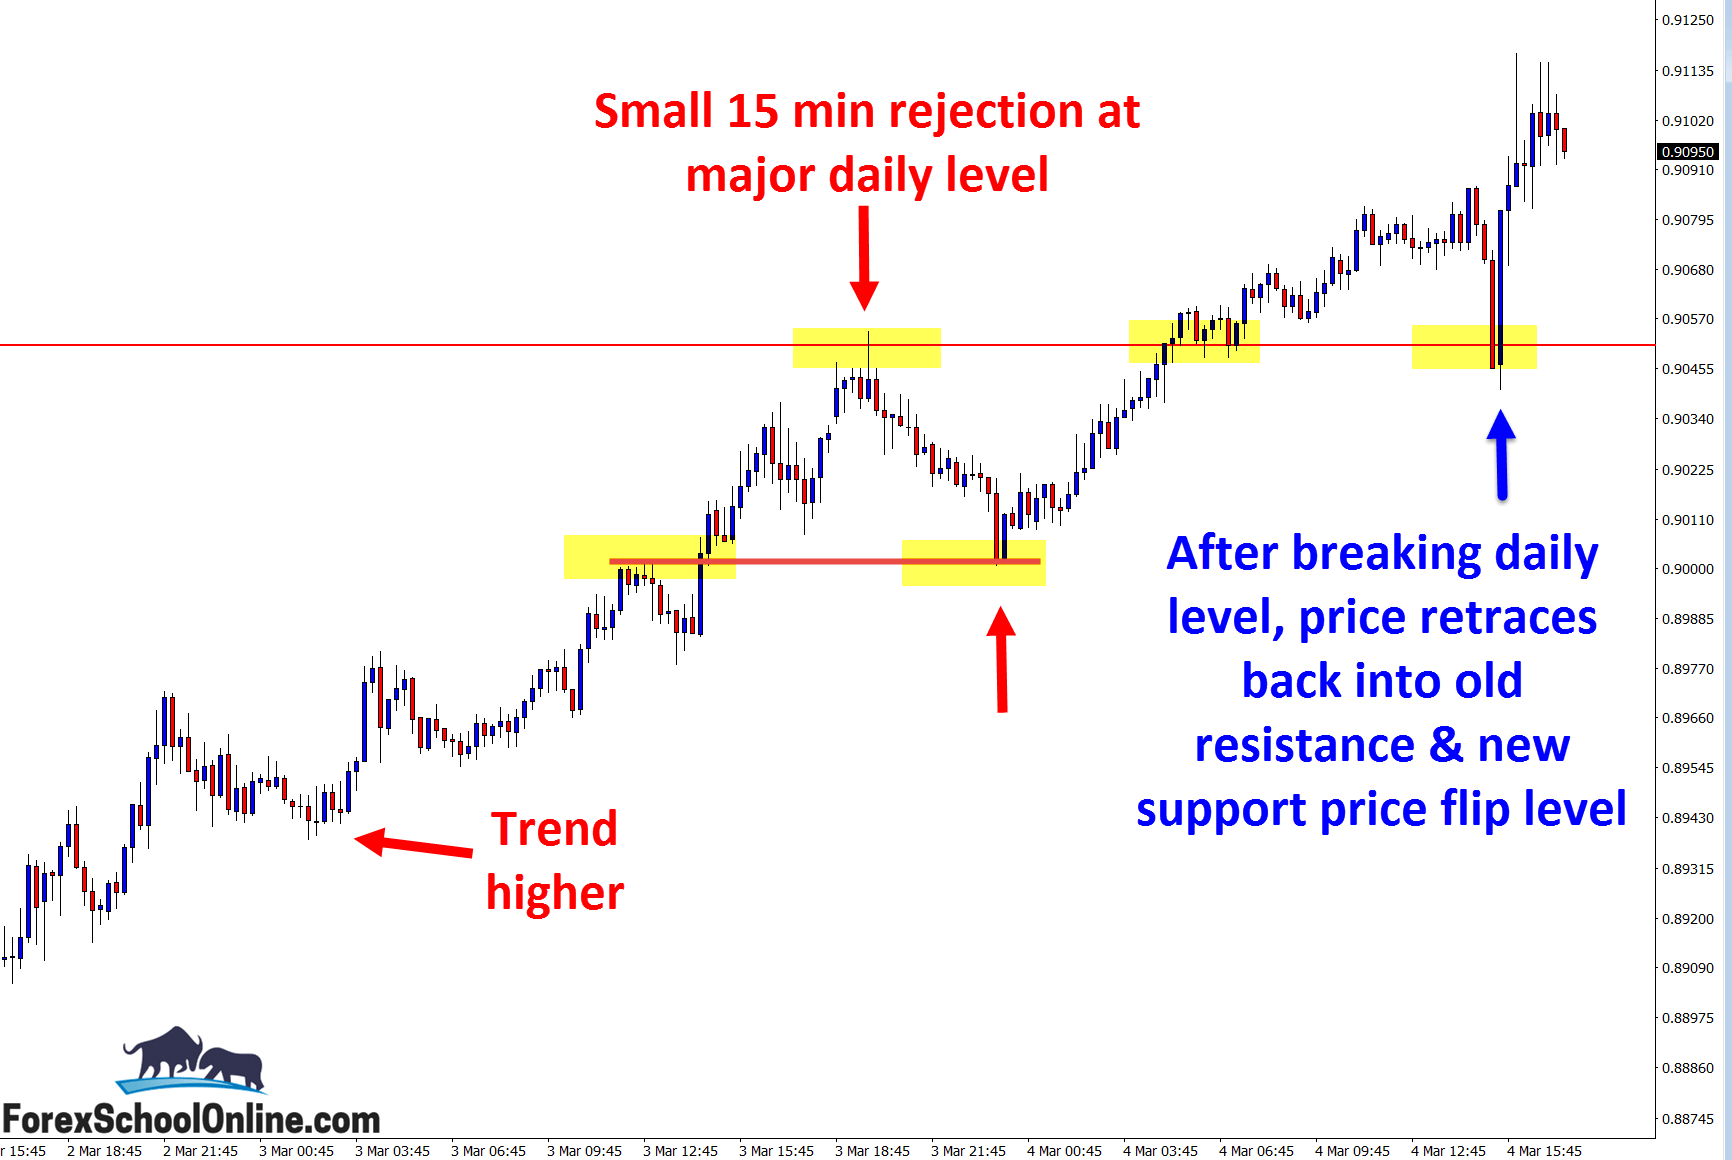 Price action story